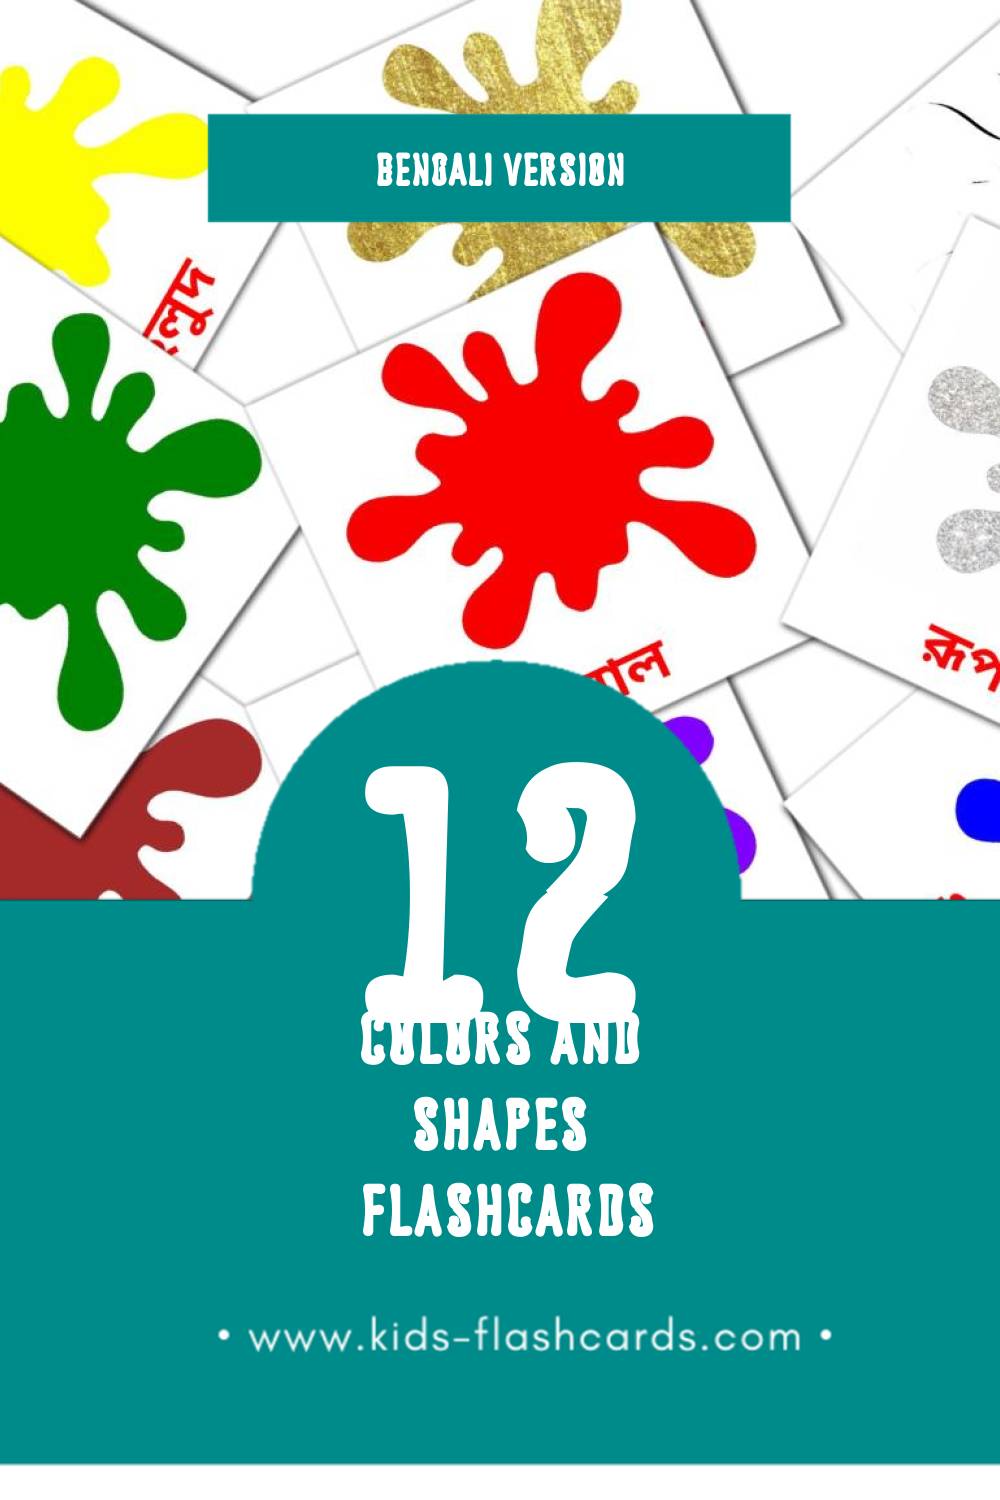 Visual রং ও আকৃতি  Flashcards for Toddlers (12 cards in Bengali)